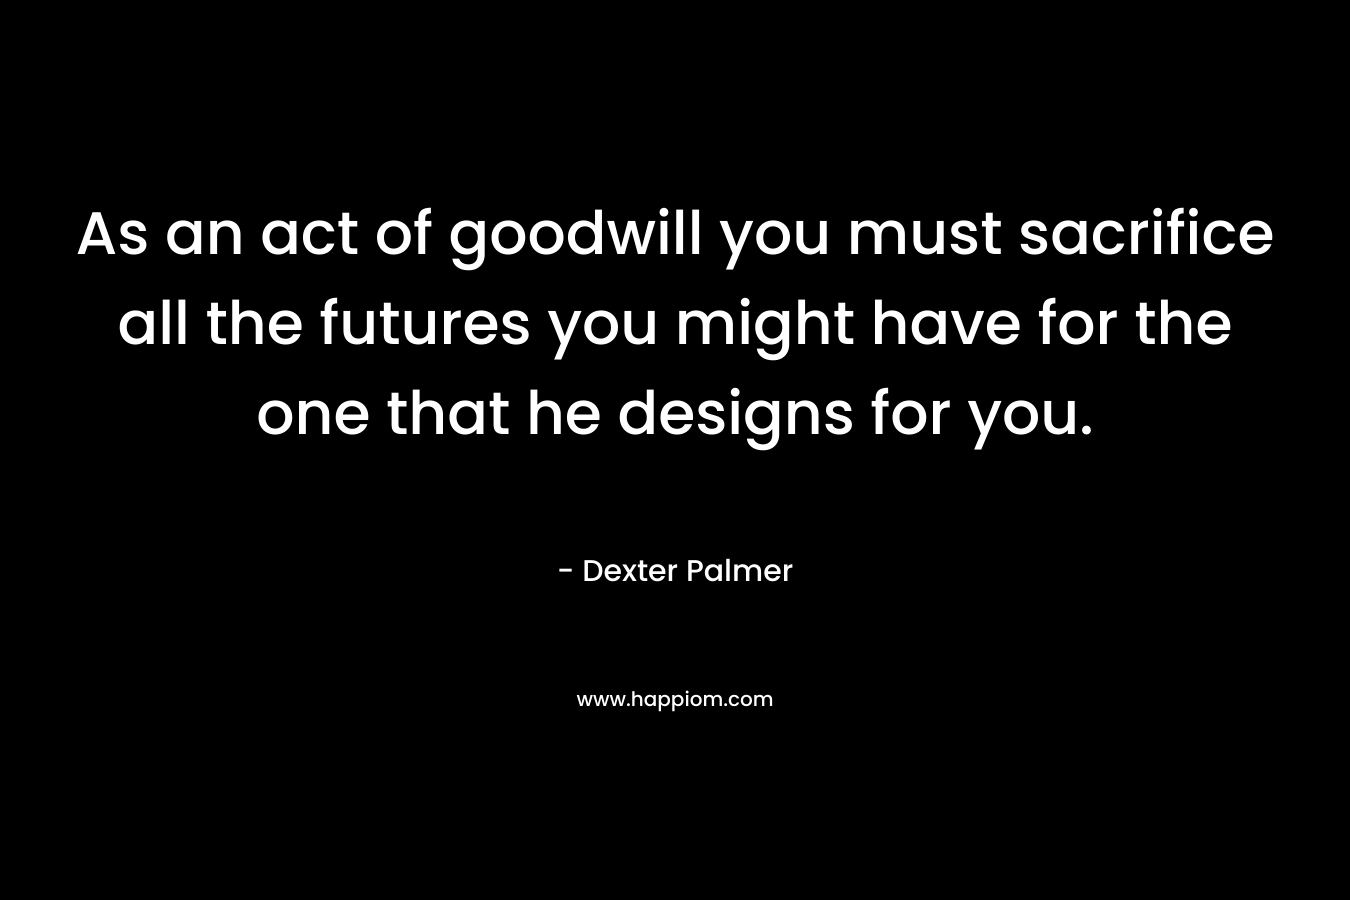 As an act of goodwill you must sacrifice all the futures you might have for the one that he designs for you. – Dexter Palmer